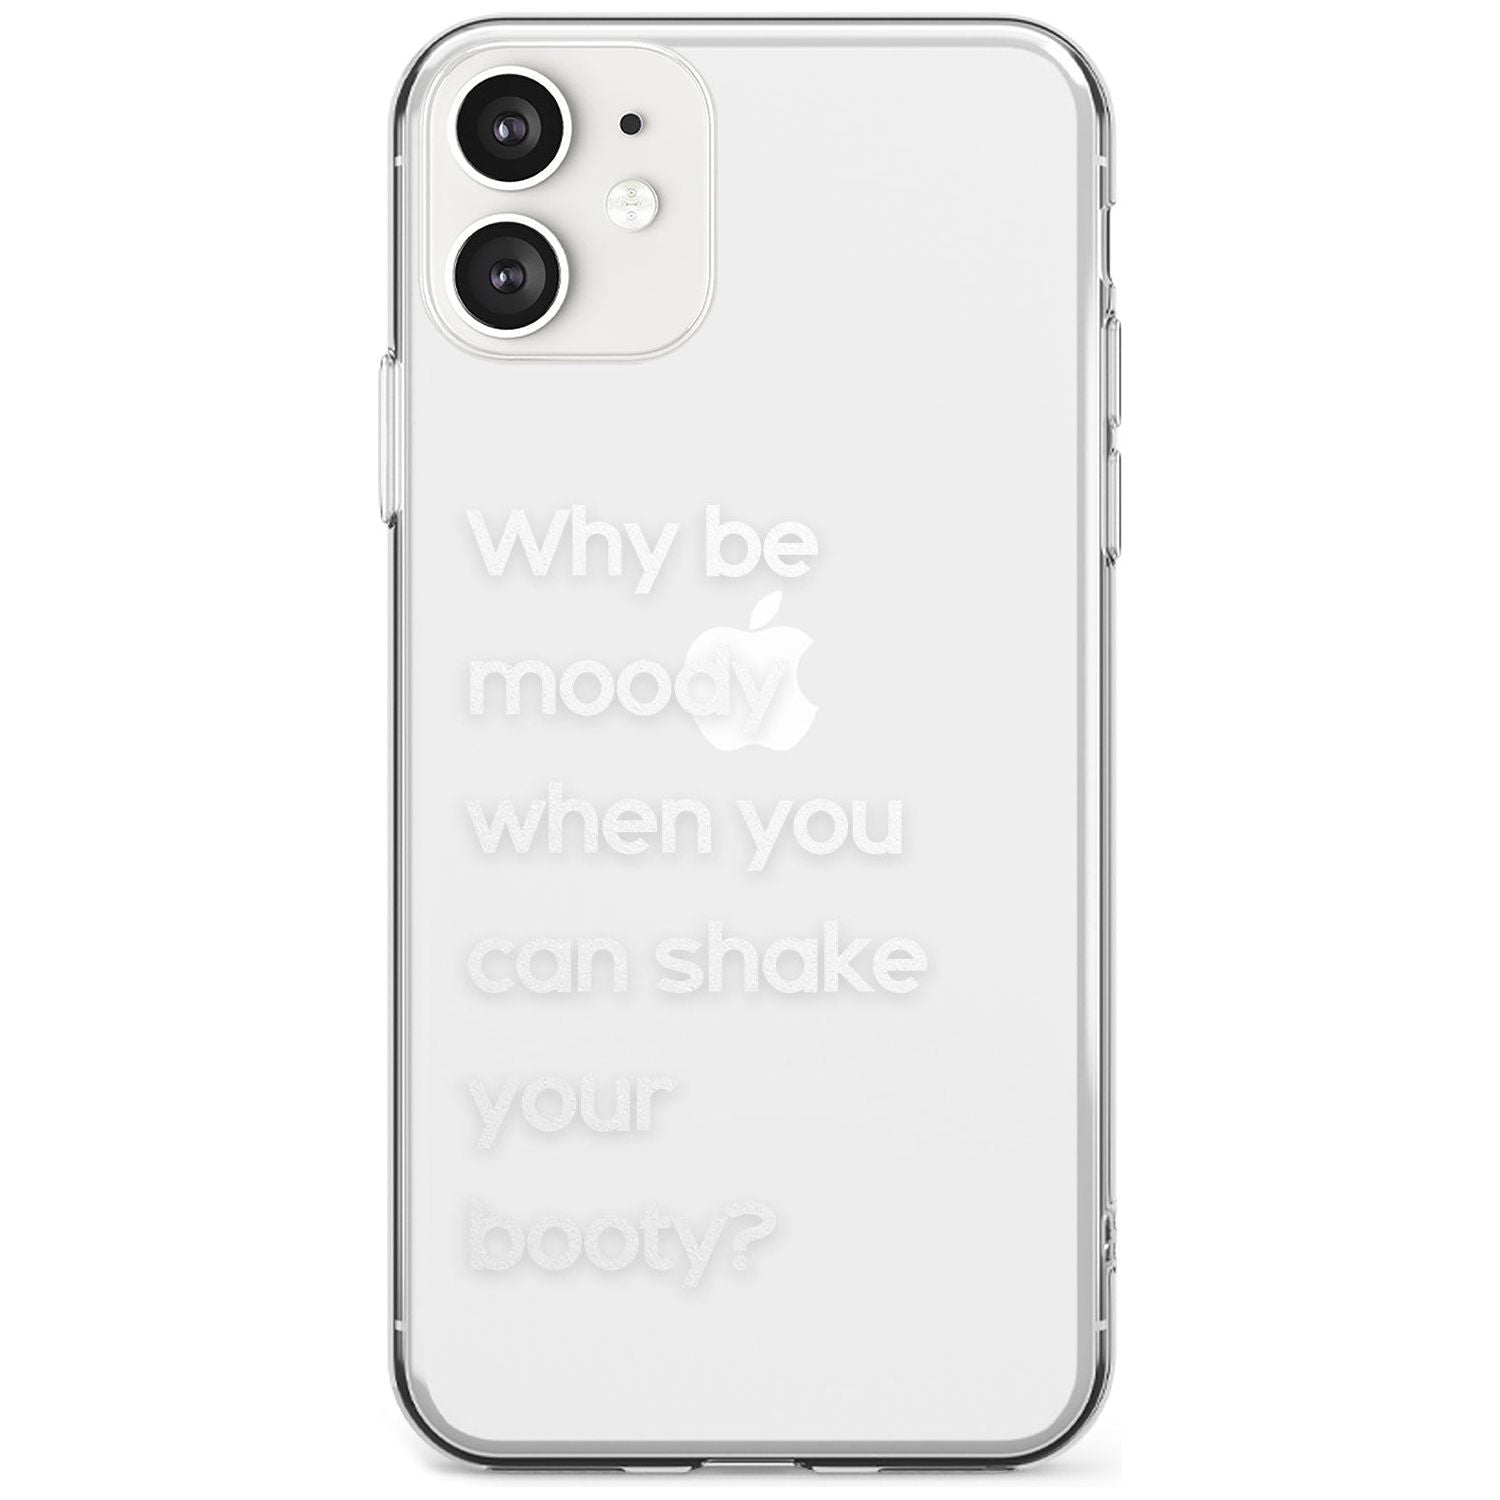 Why be moody? (White) Black Impact Phone Case for iPhone 11